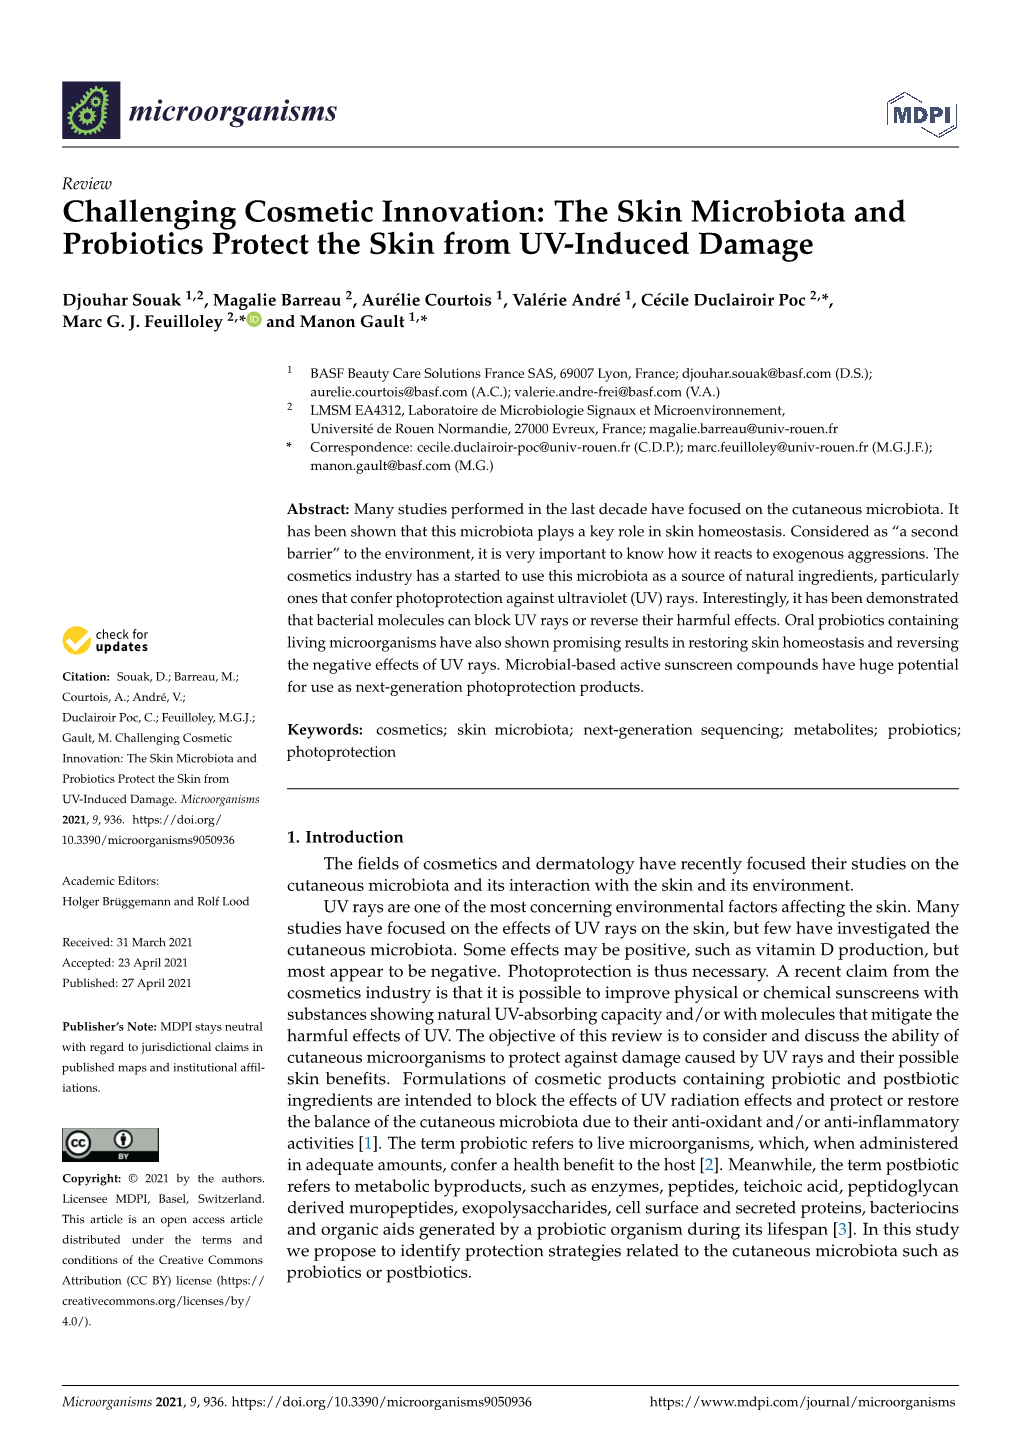 The Skin Microbiota and Probiotics Protect the Skin from UV-Induced Damage